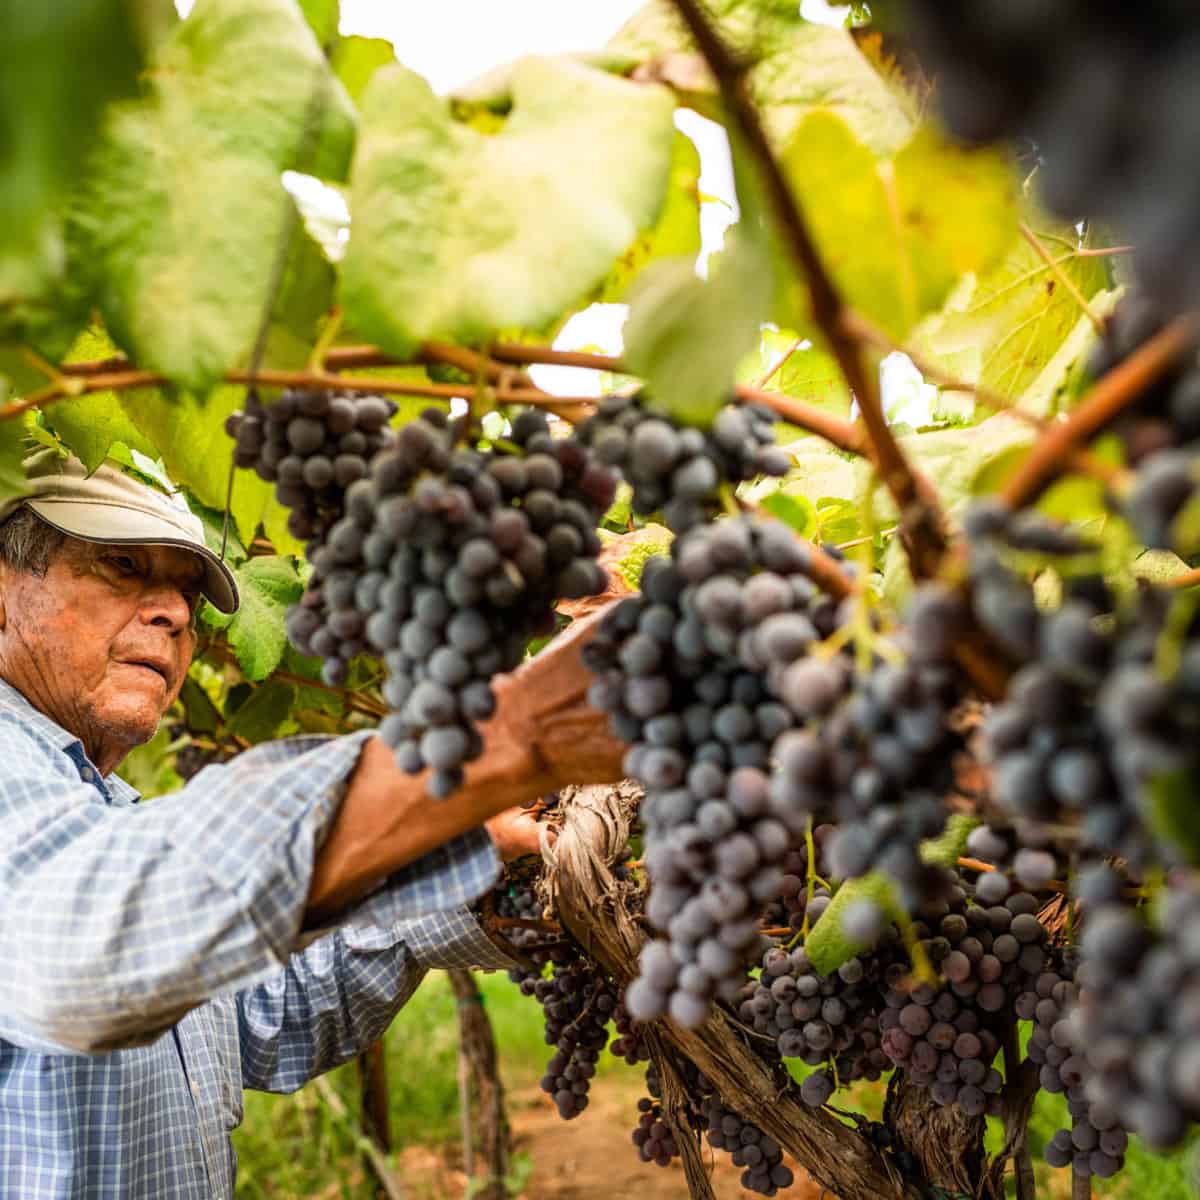 Justin Topete tending to his grapevines in Reedley, CA